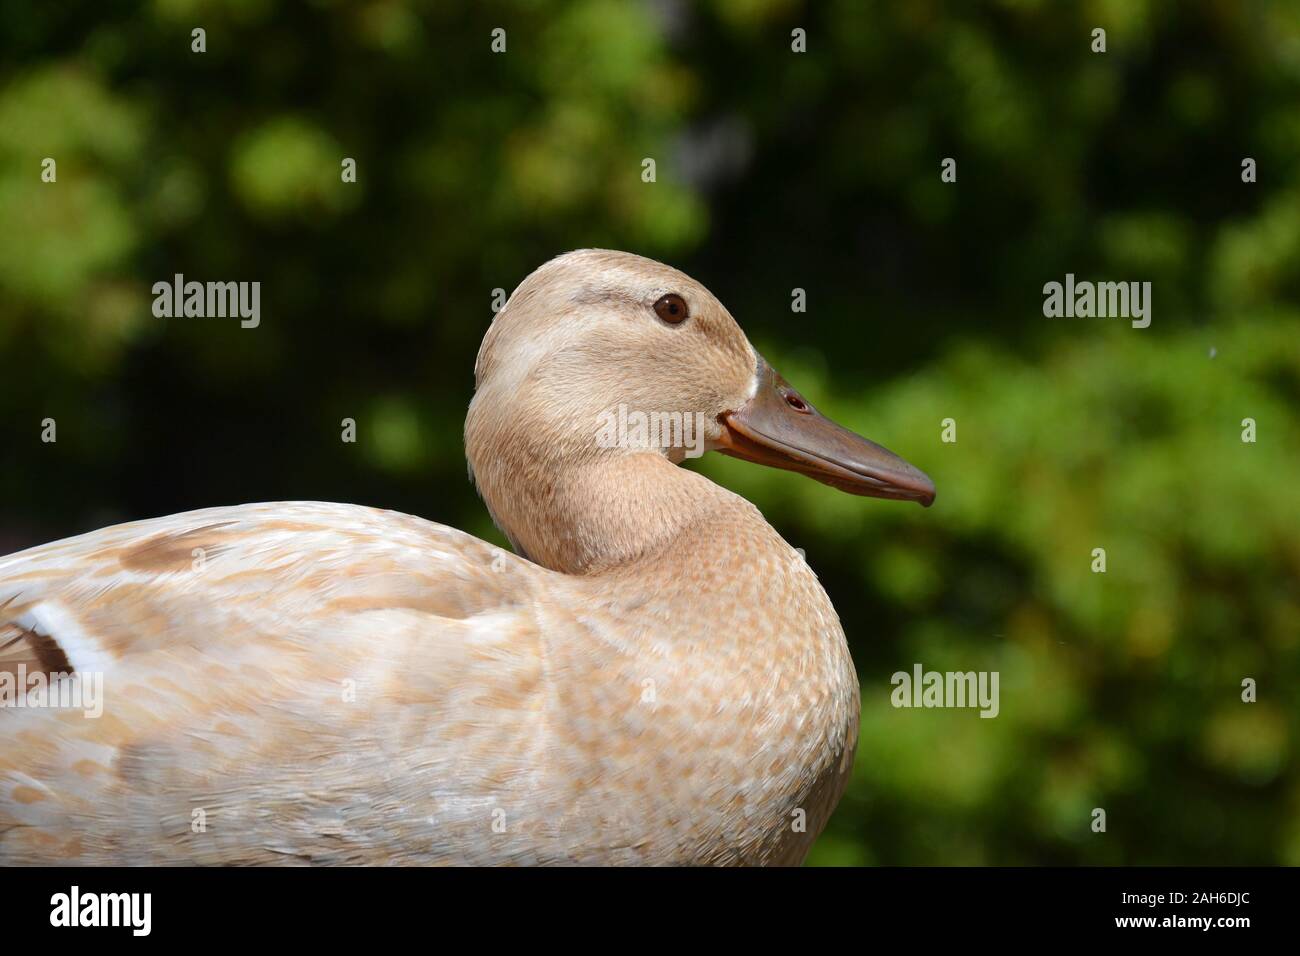 A close up of a very pretty golden duck. Soft yellow feathers, small head. Green background Stock Photo